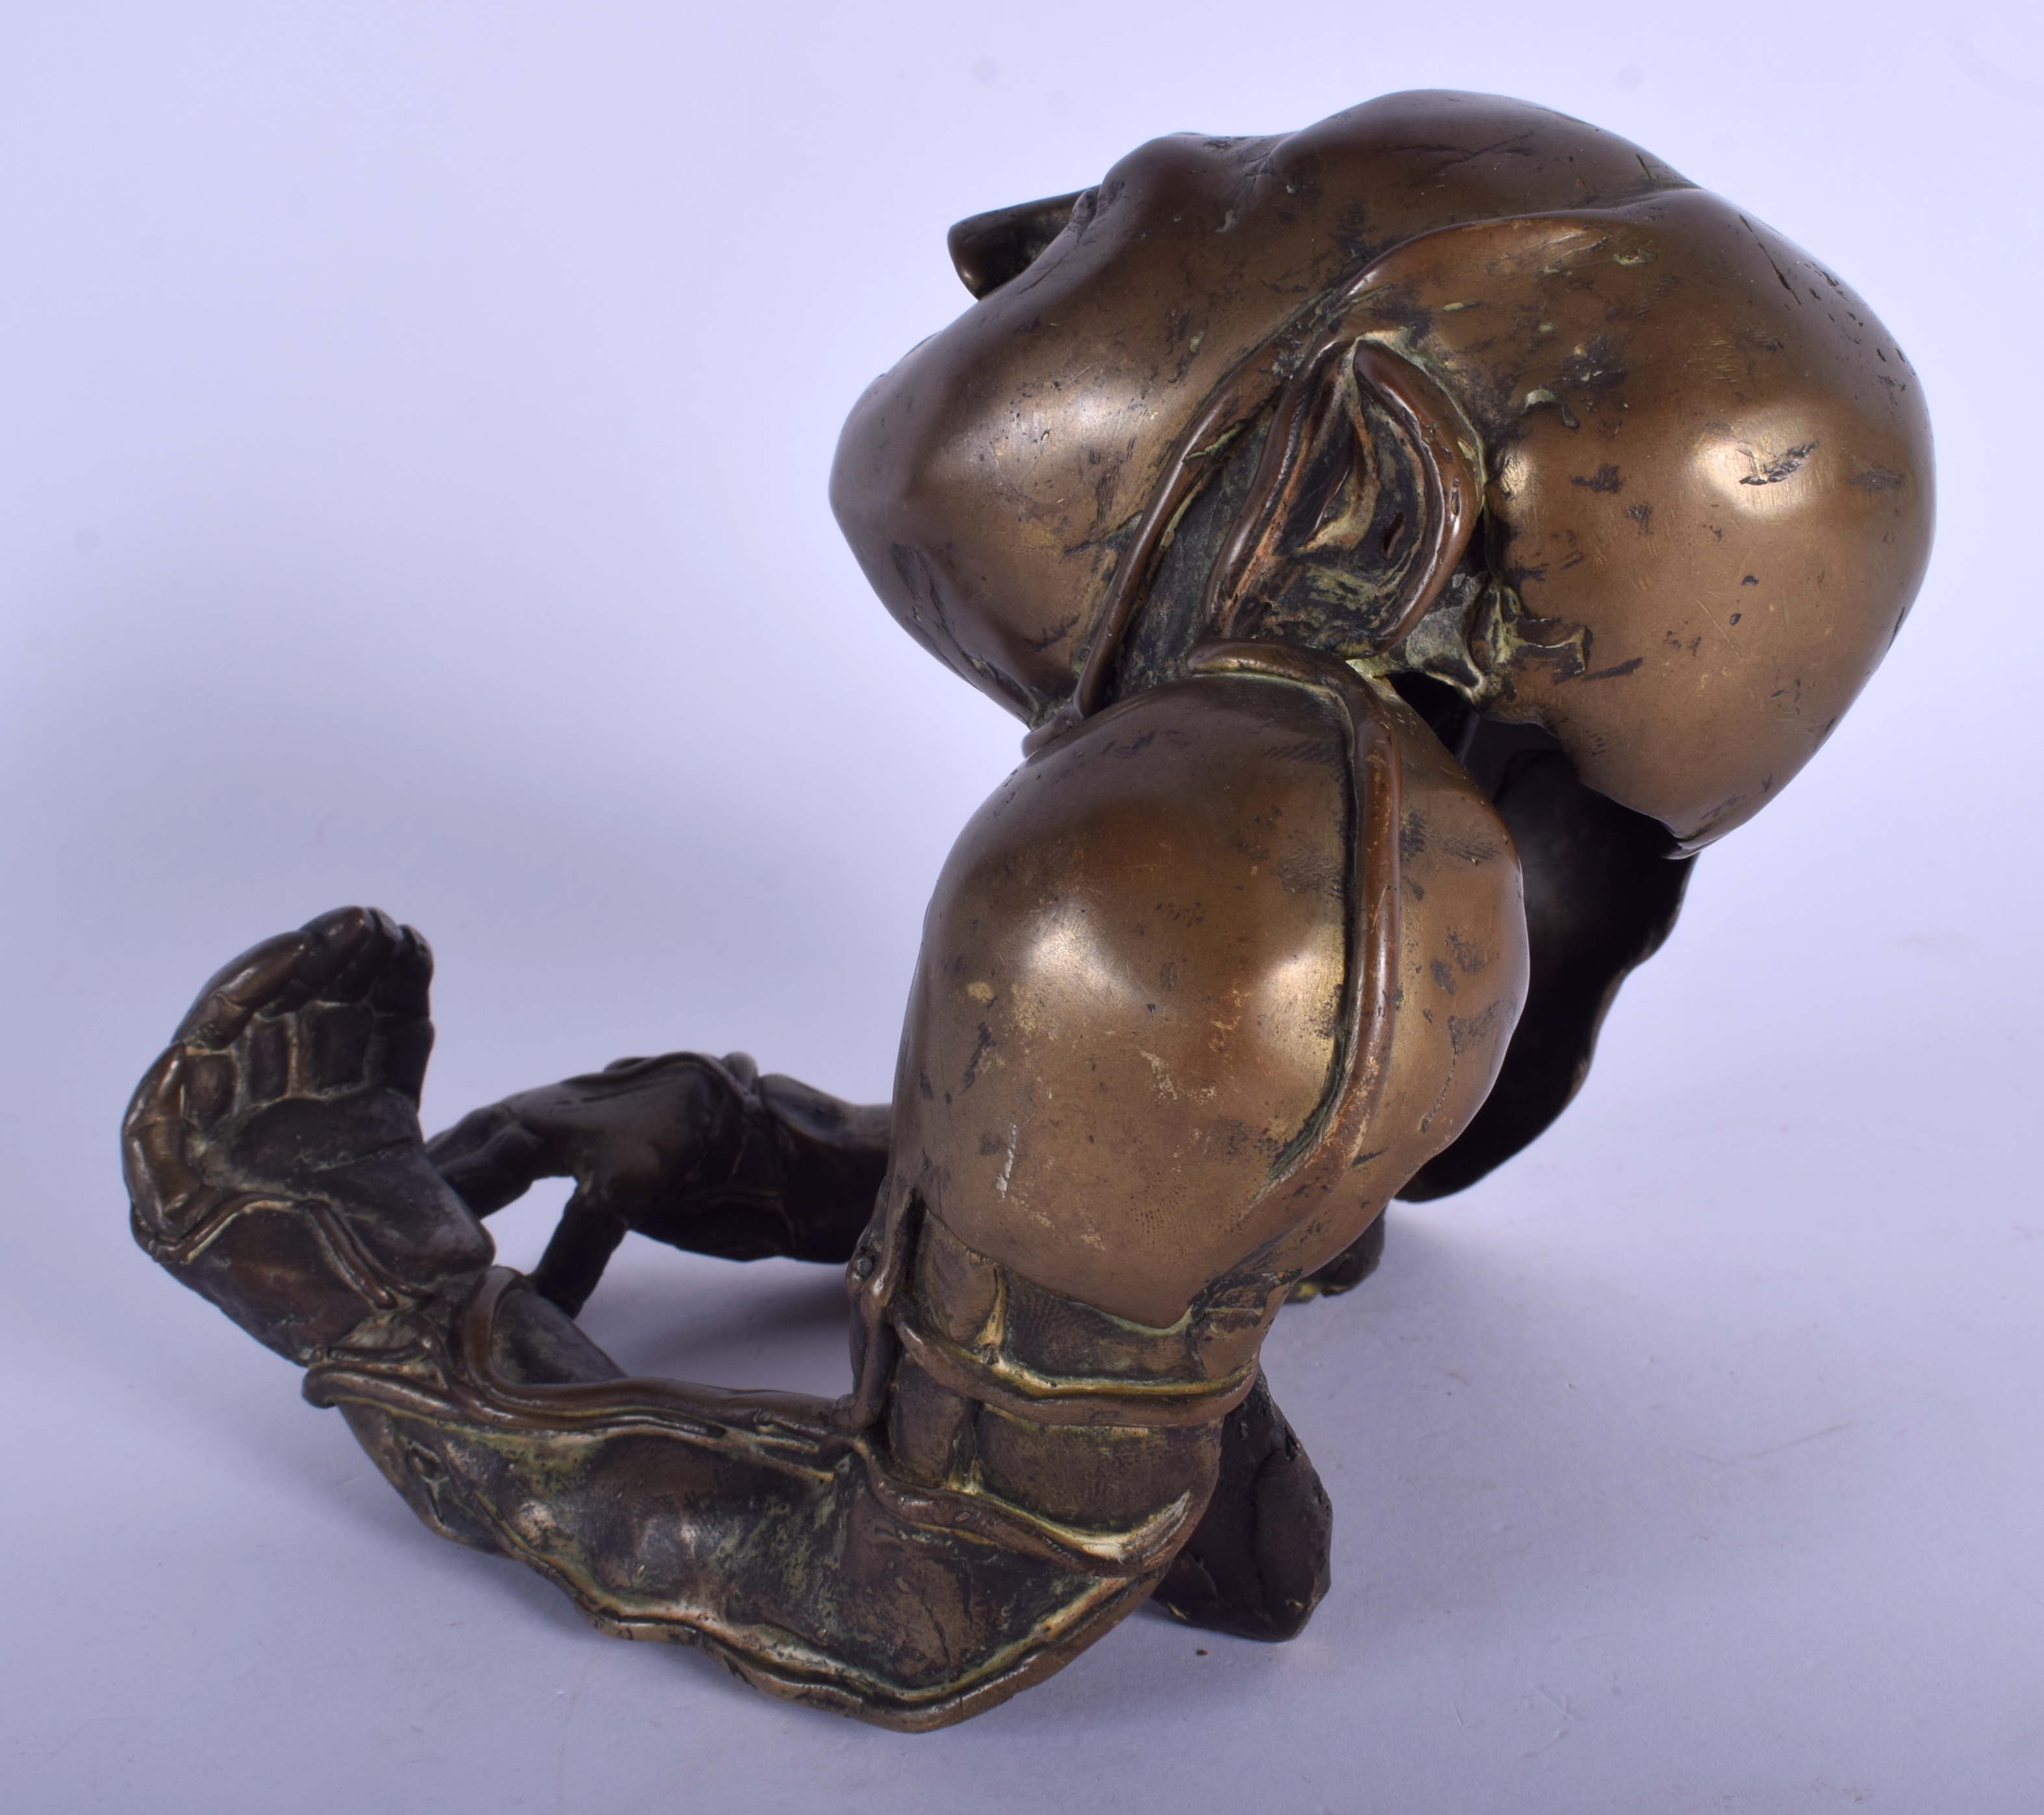 A 1990S EUROPEAN BRONZE FIGURE OF AN ABSTRACT MALE by Bruno Quitellier. 16 cm x 11 cm. - Image 2 of 5